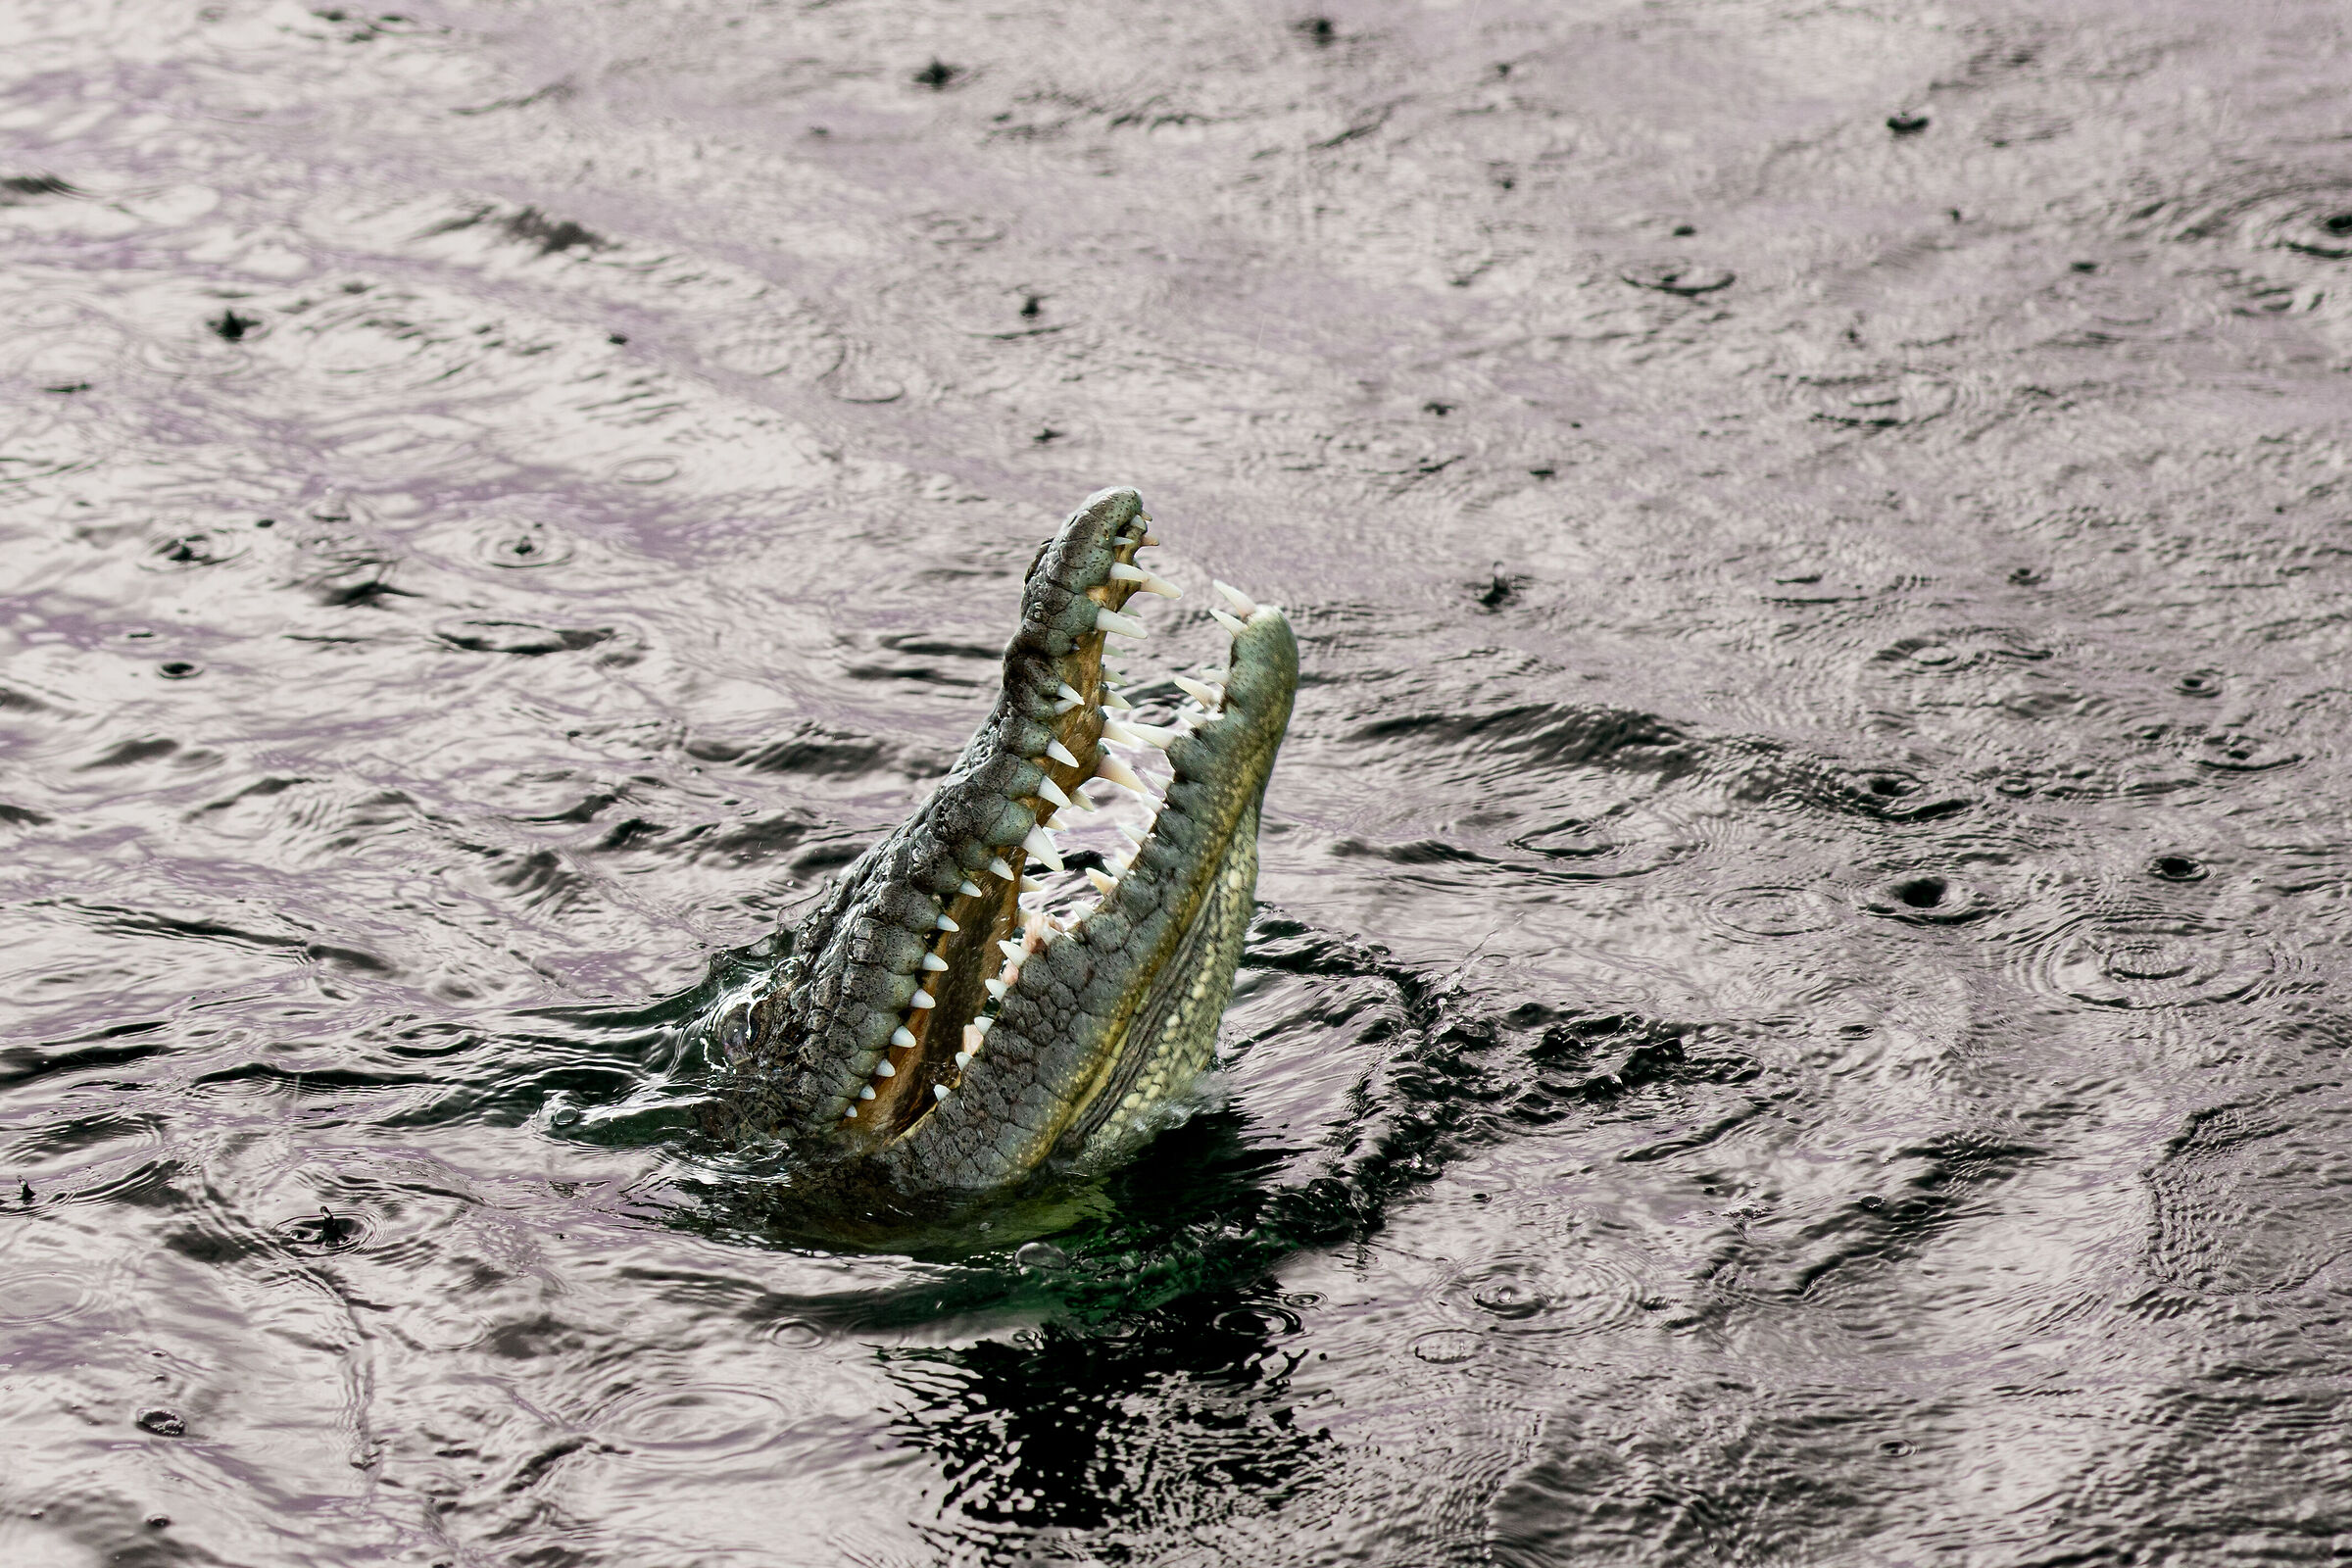 Hungry crocodile in the deluge...